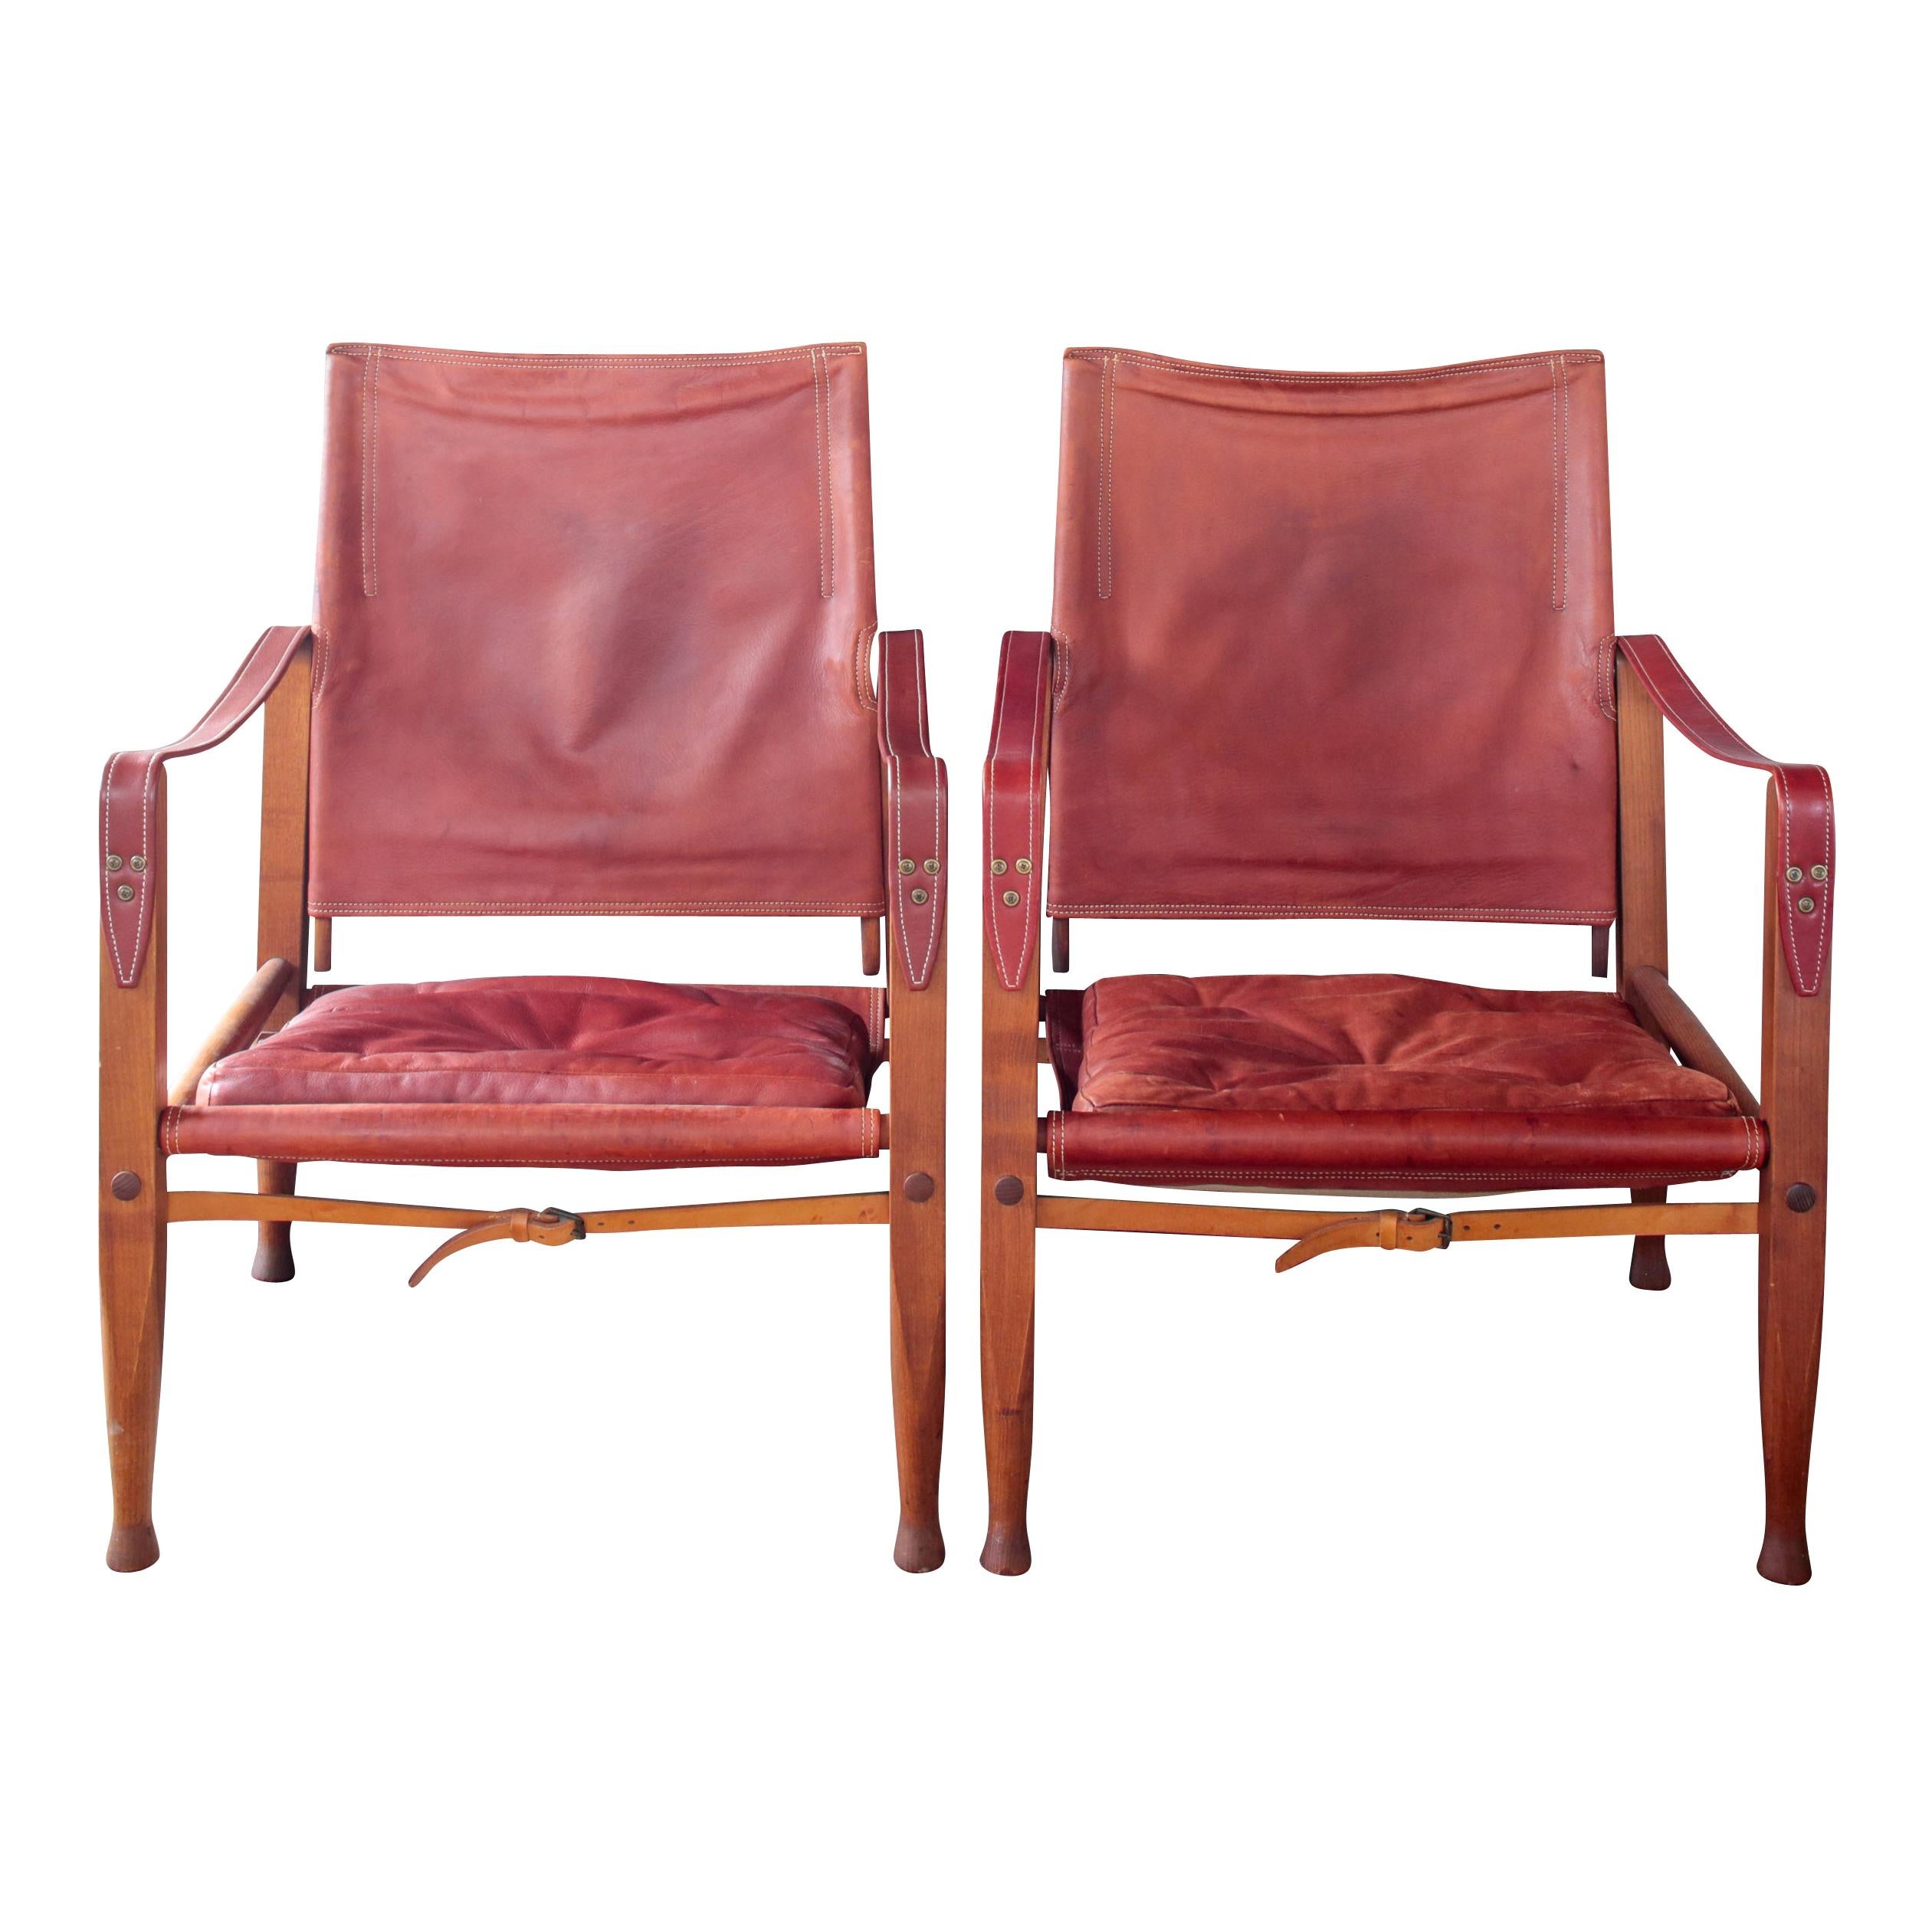 Midcentury Safari Chairs by Kaare Klint in Oxblood Leather with Rosewood Frame